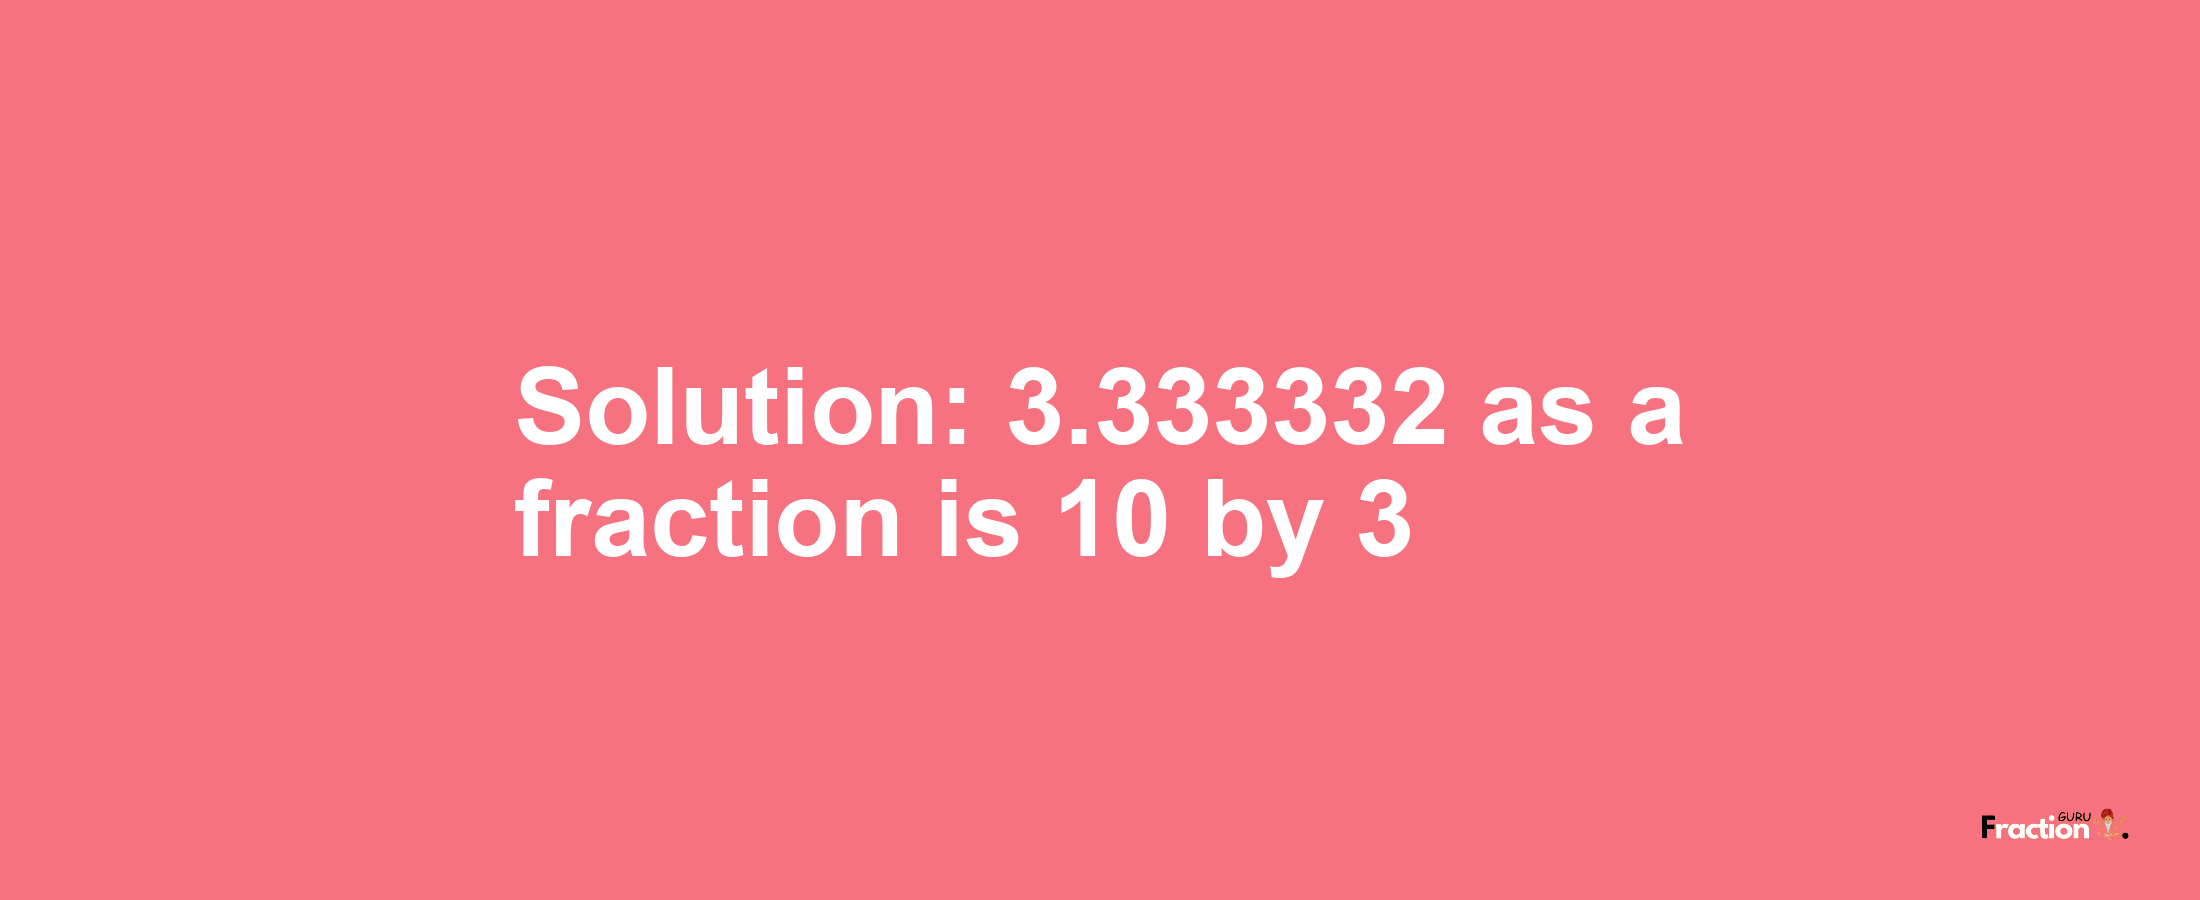 Solution:3.333332 as a fraction is 10/3